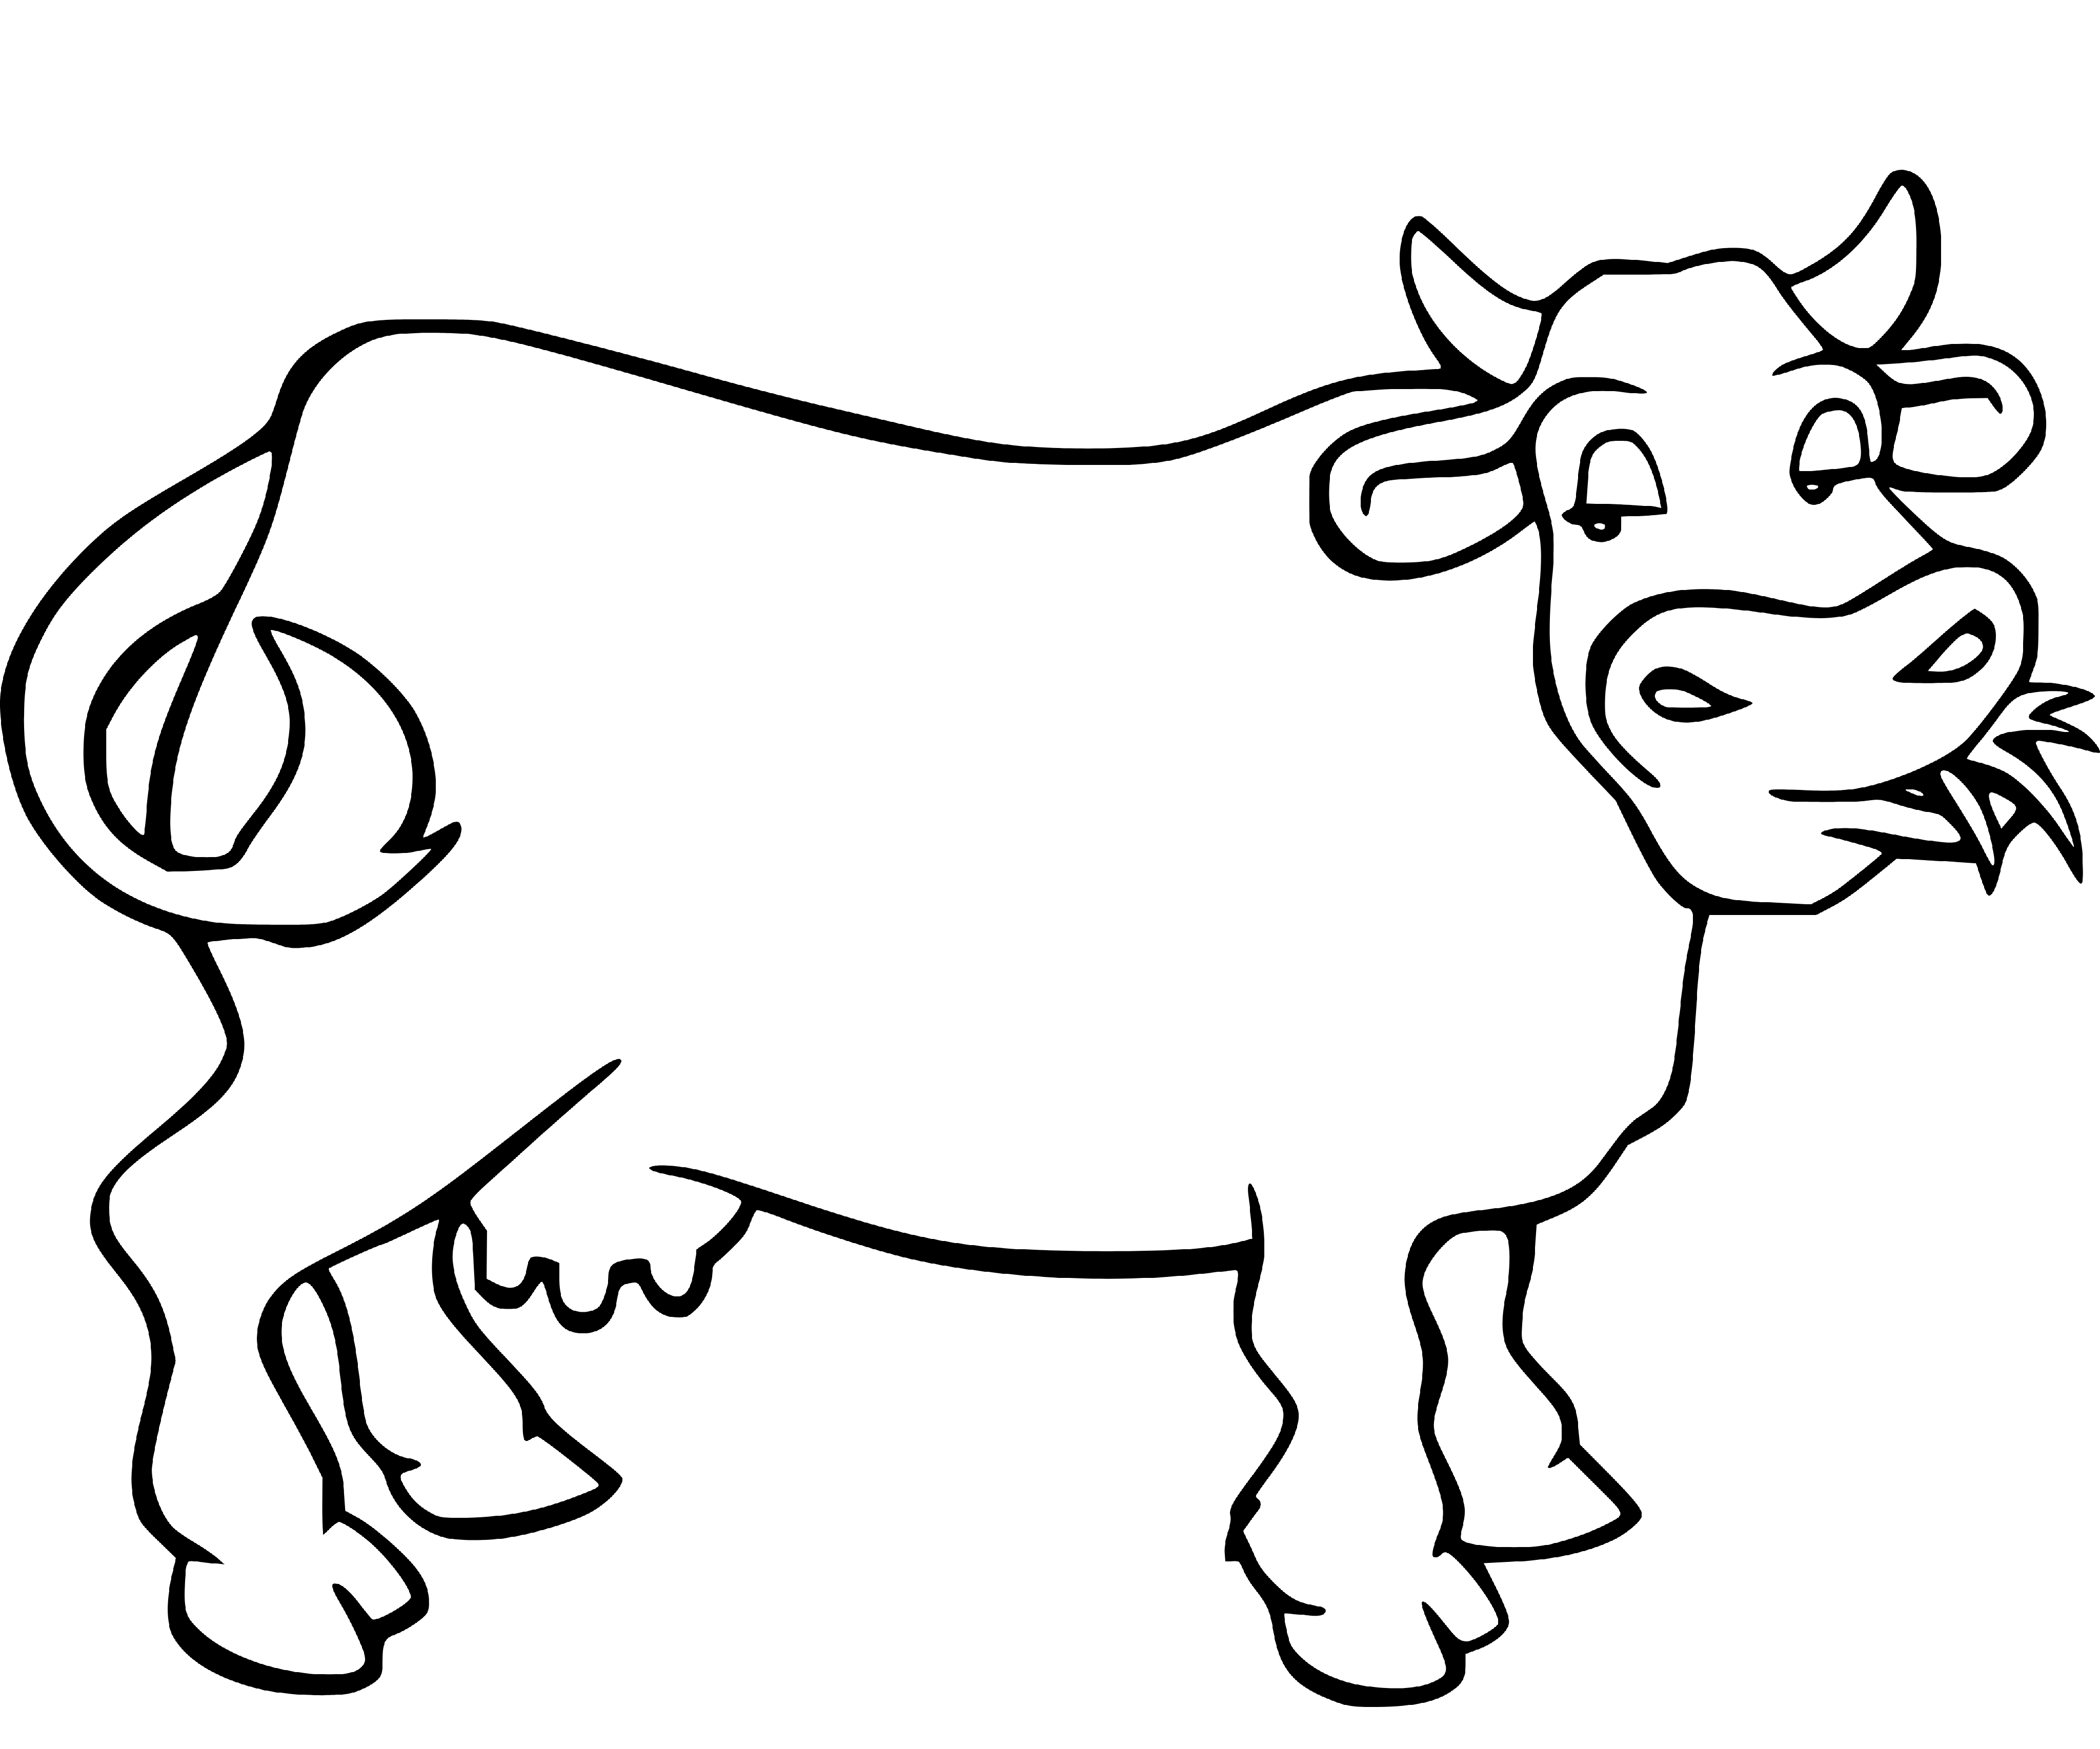 Printable Cow eating grass Coloring Page for kids.